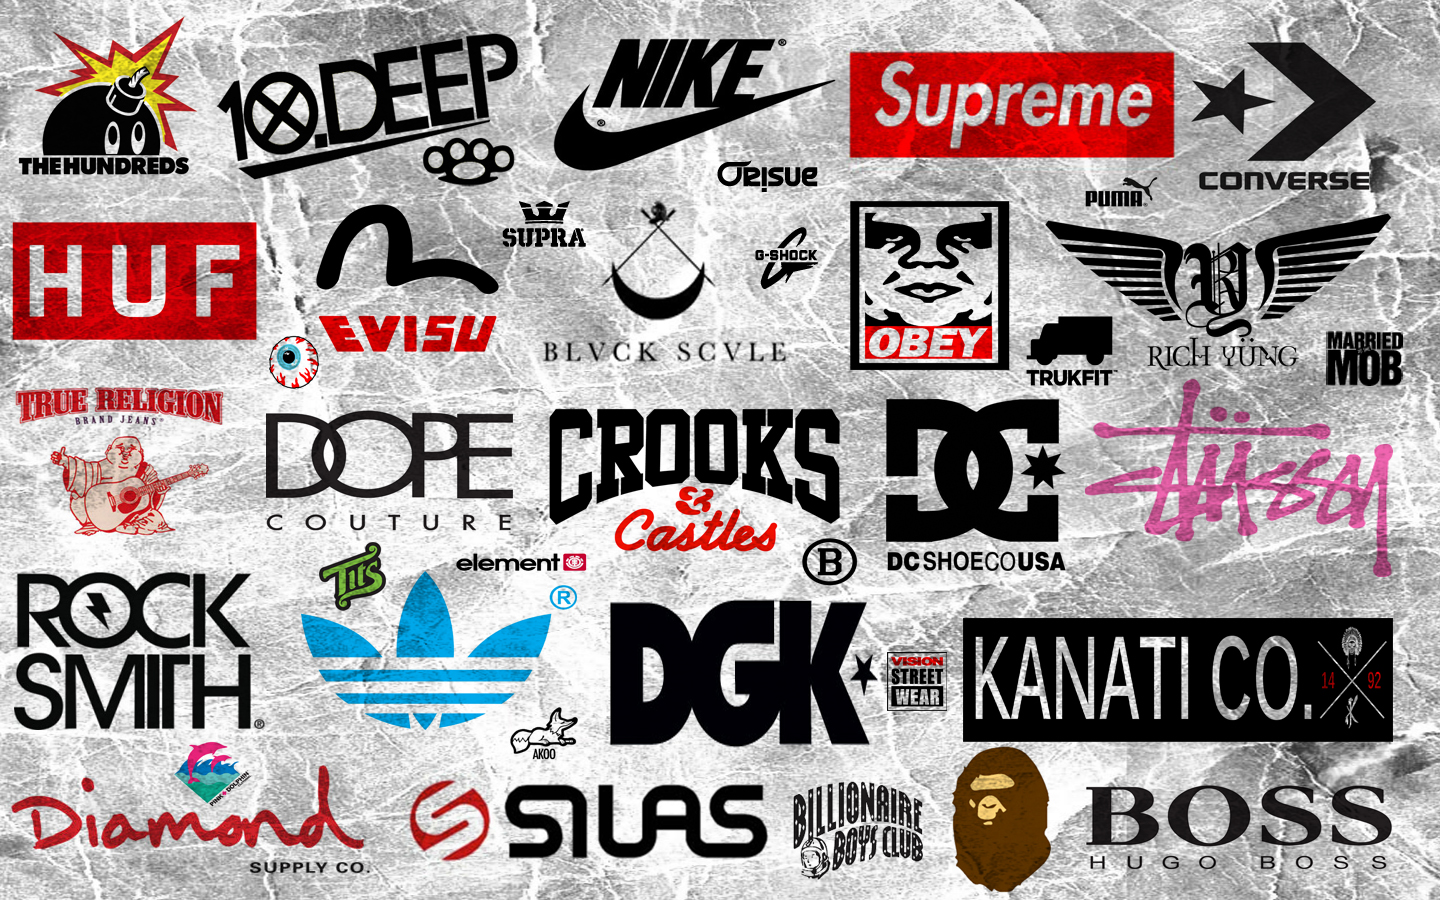 Download wallpaper of brands - Clothing Brand Logos Flickr Photo